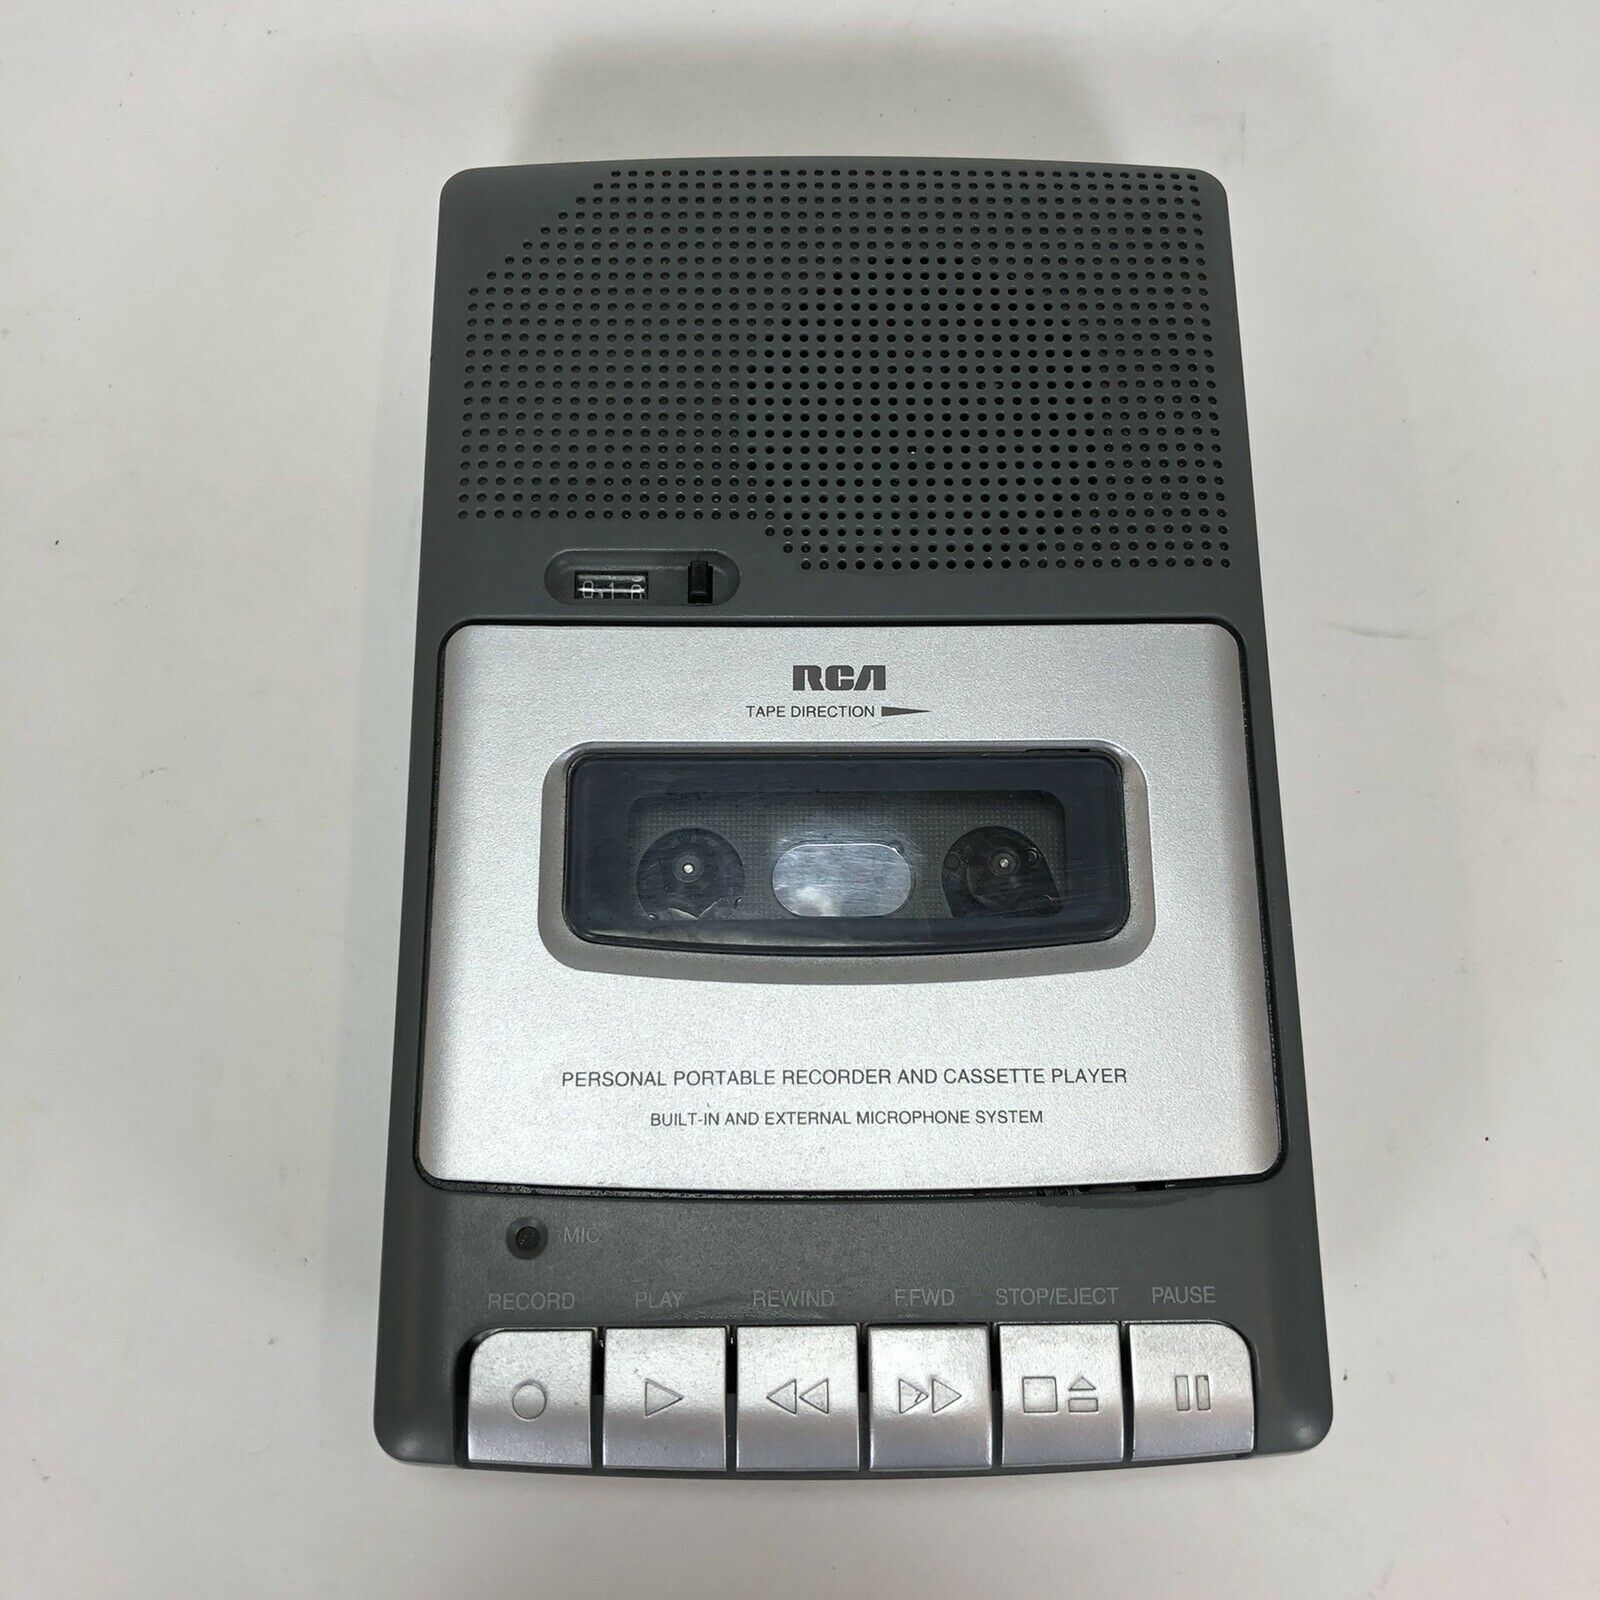 Primary image for RCA RP3503-B Portable Tape Cassette Player Recorder Vintage Audio